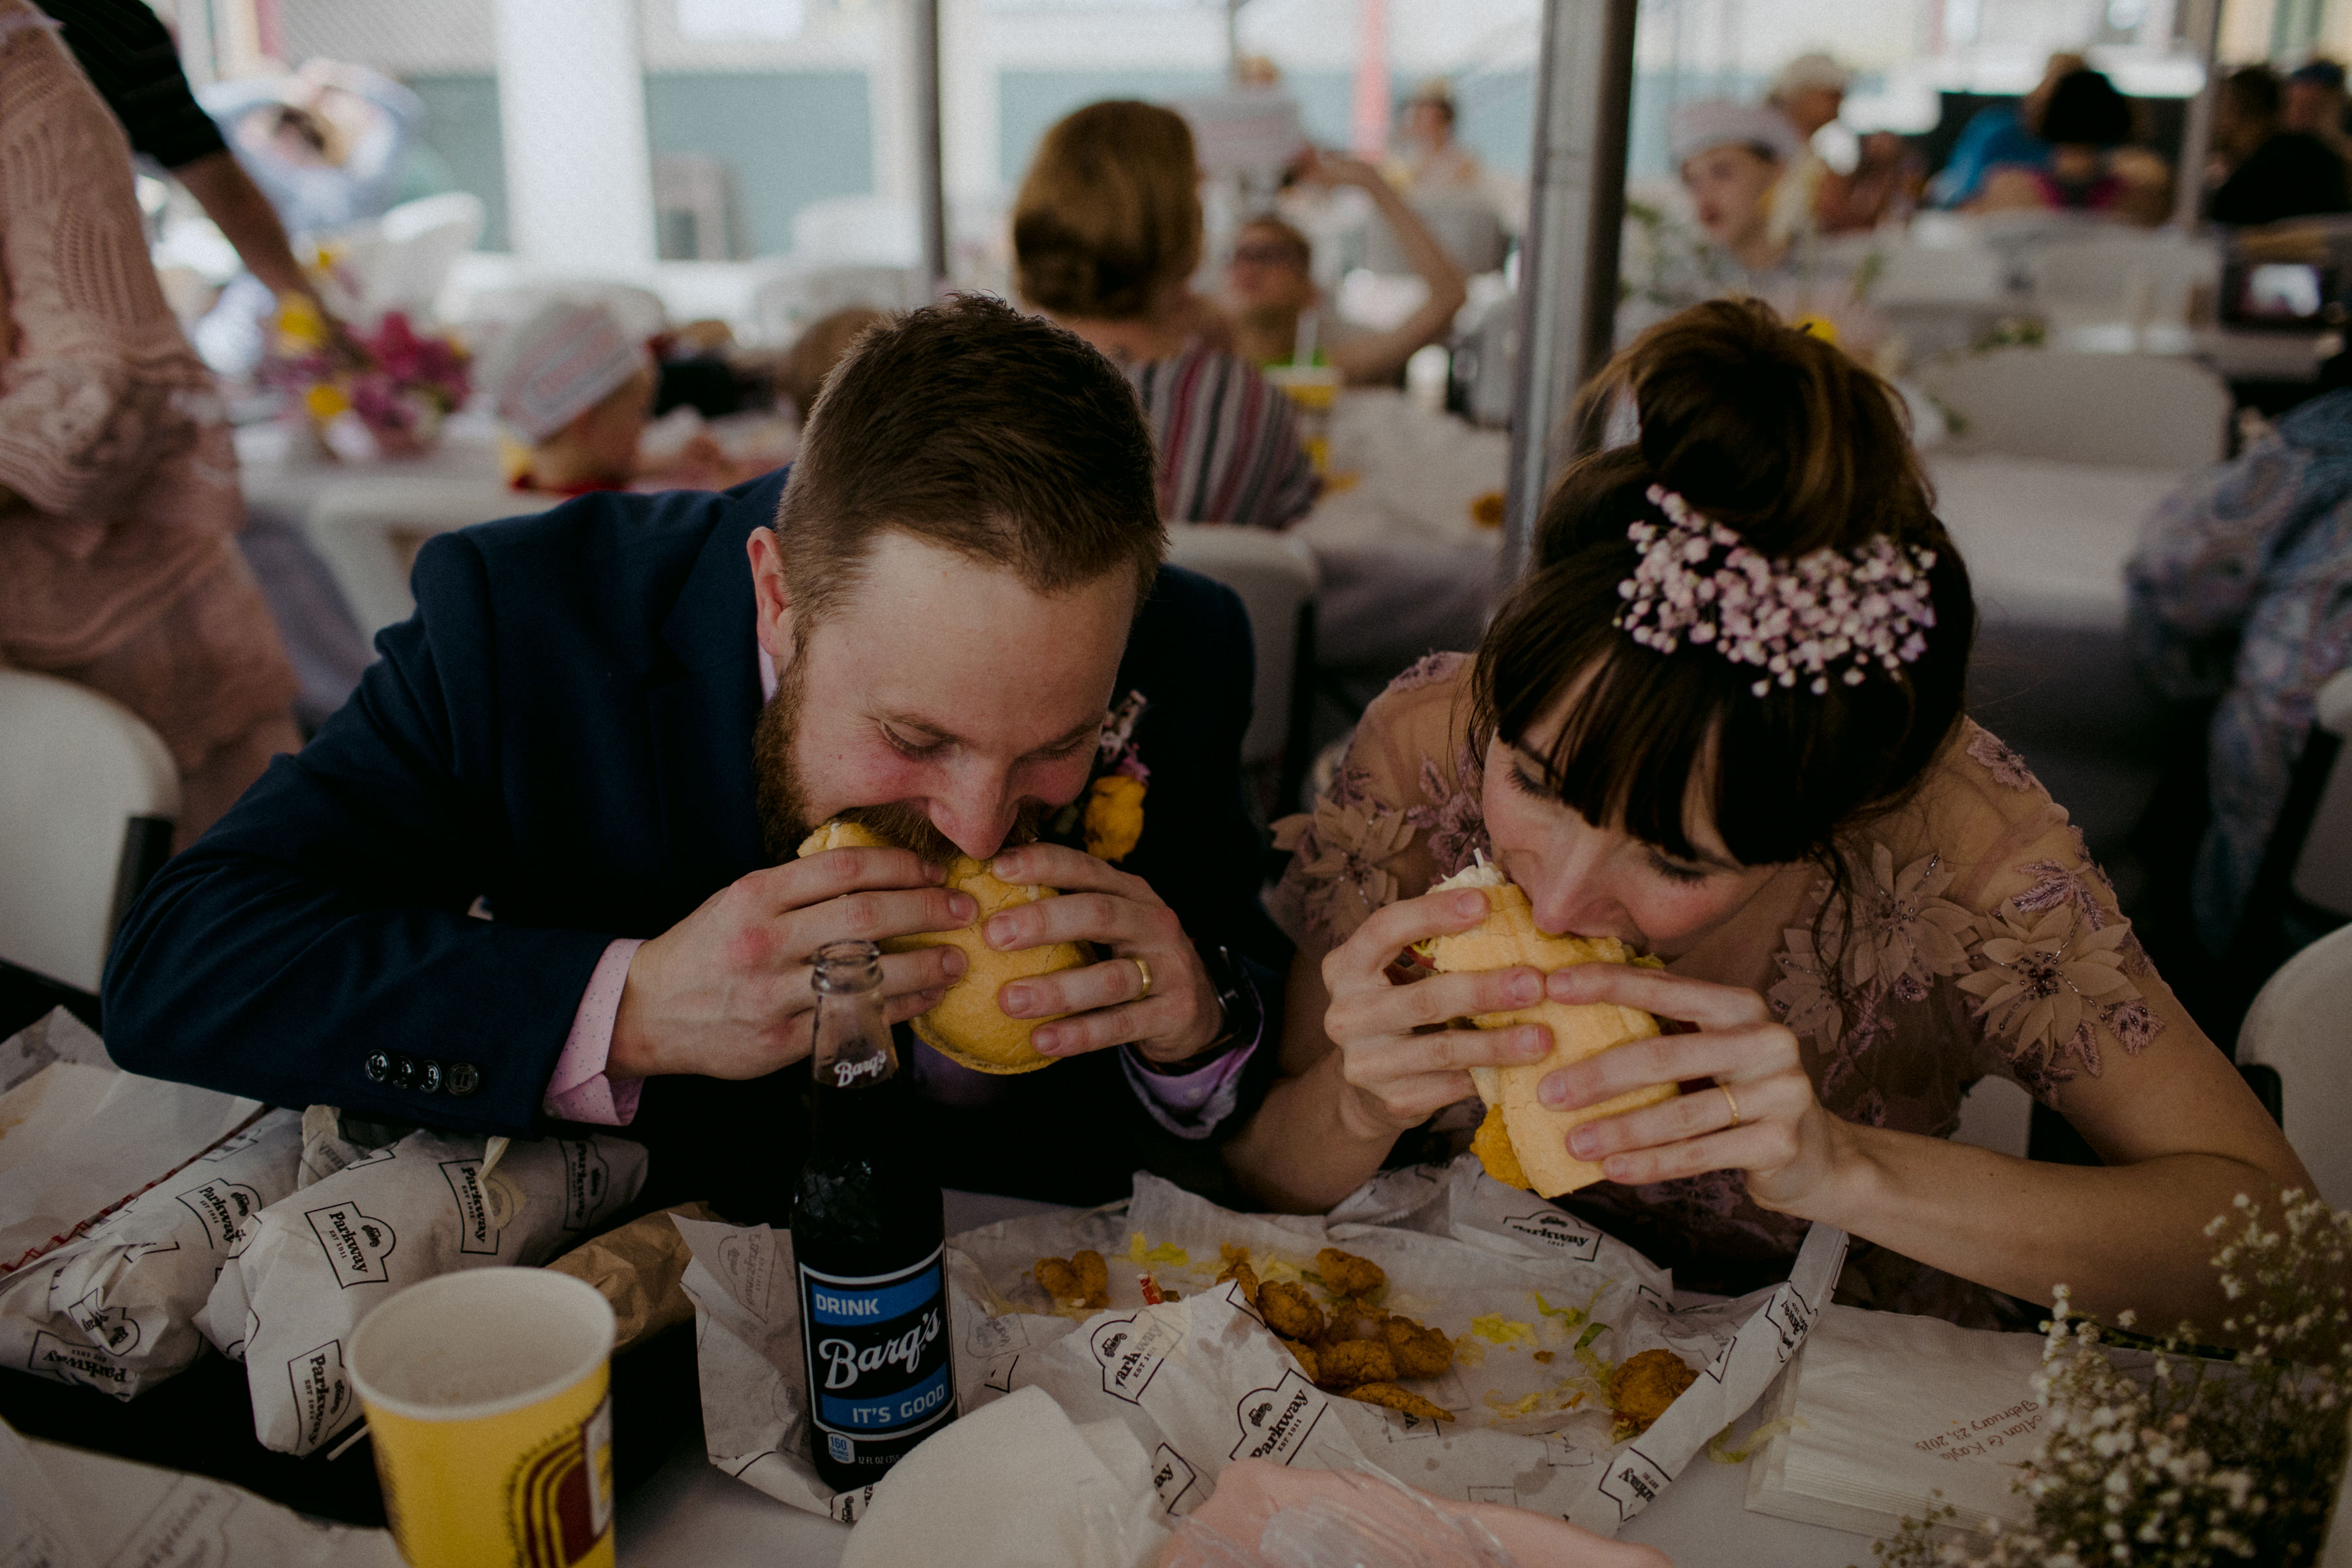 The couple loves fast food, so they went for it